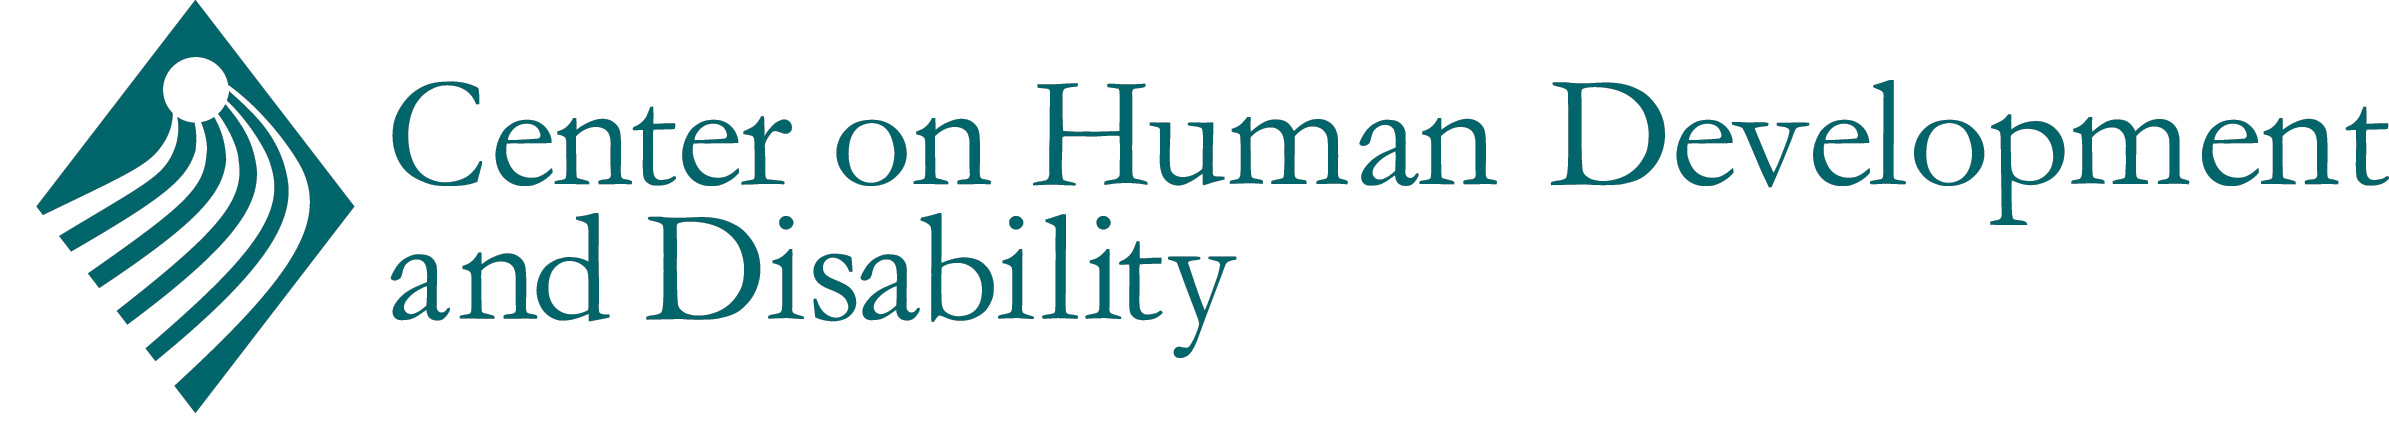 Center on Human Development and Disability